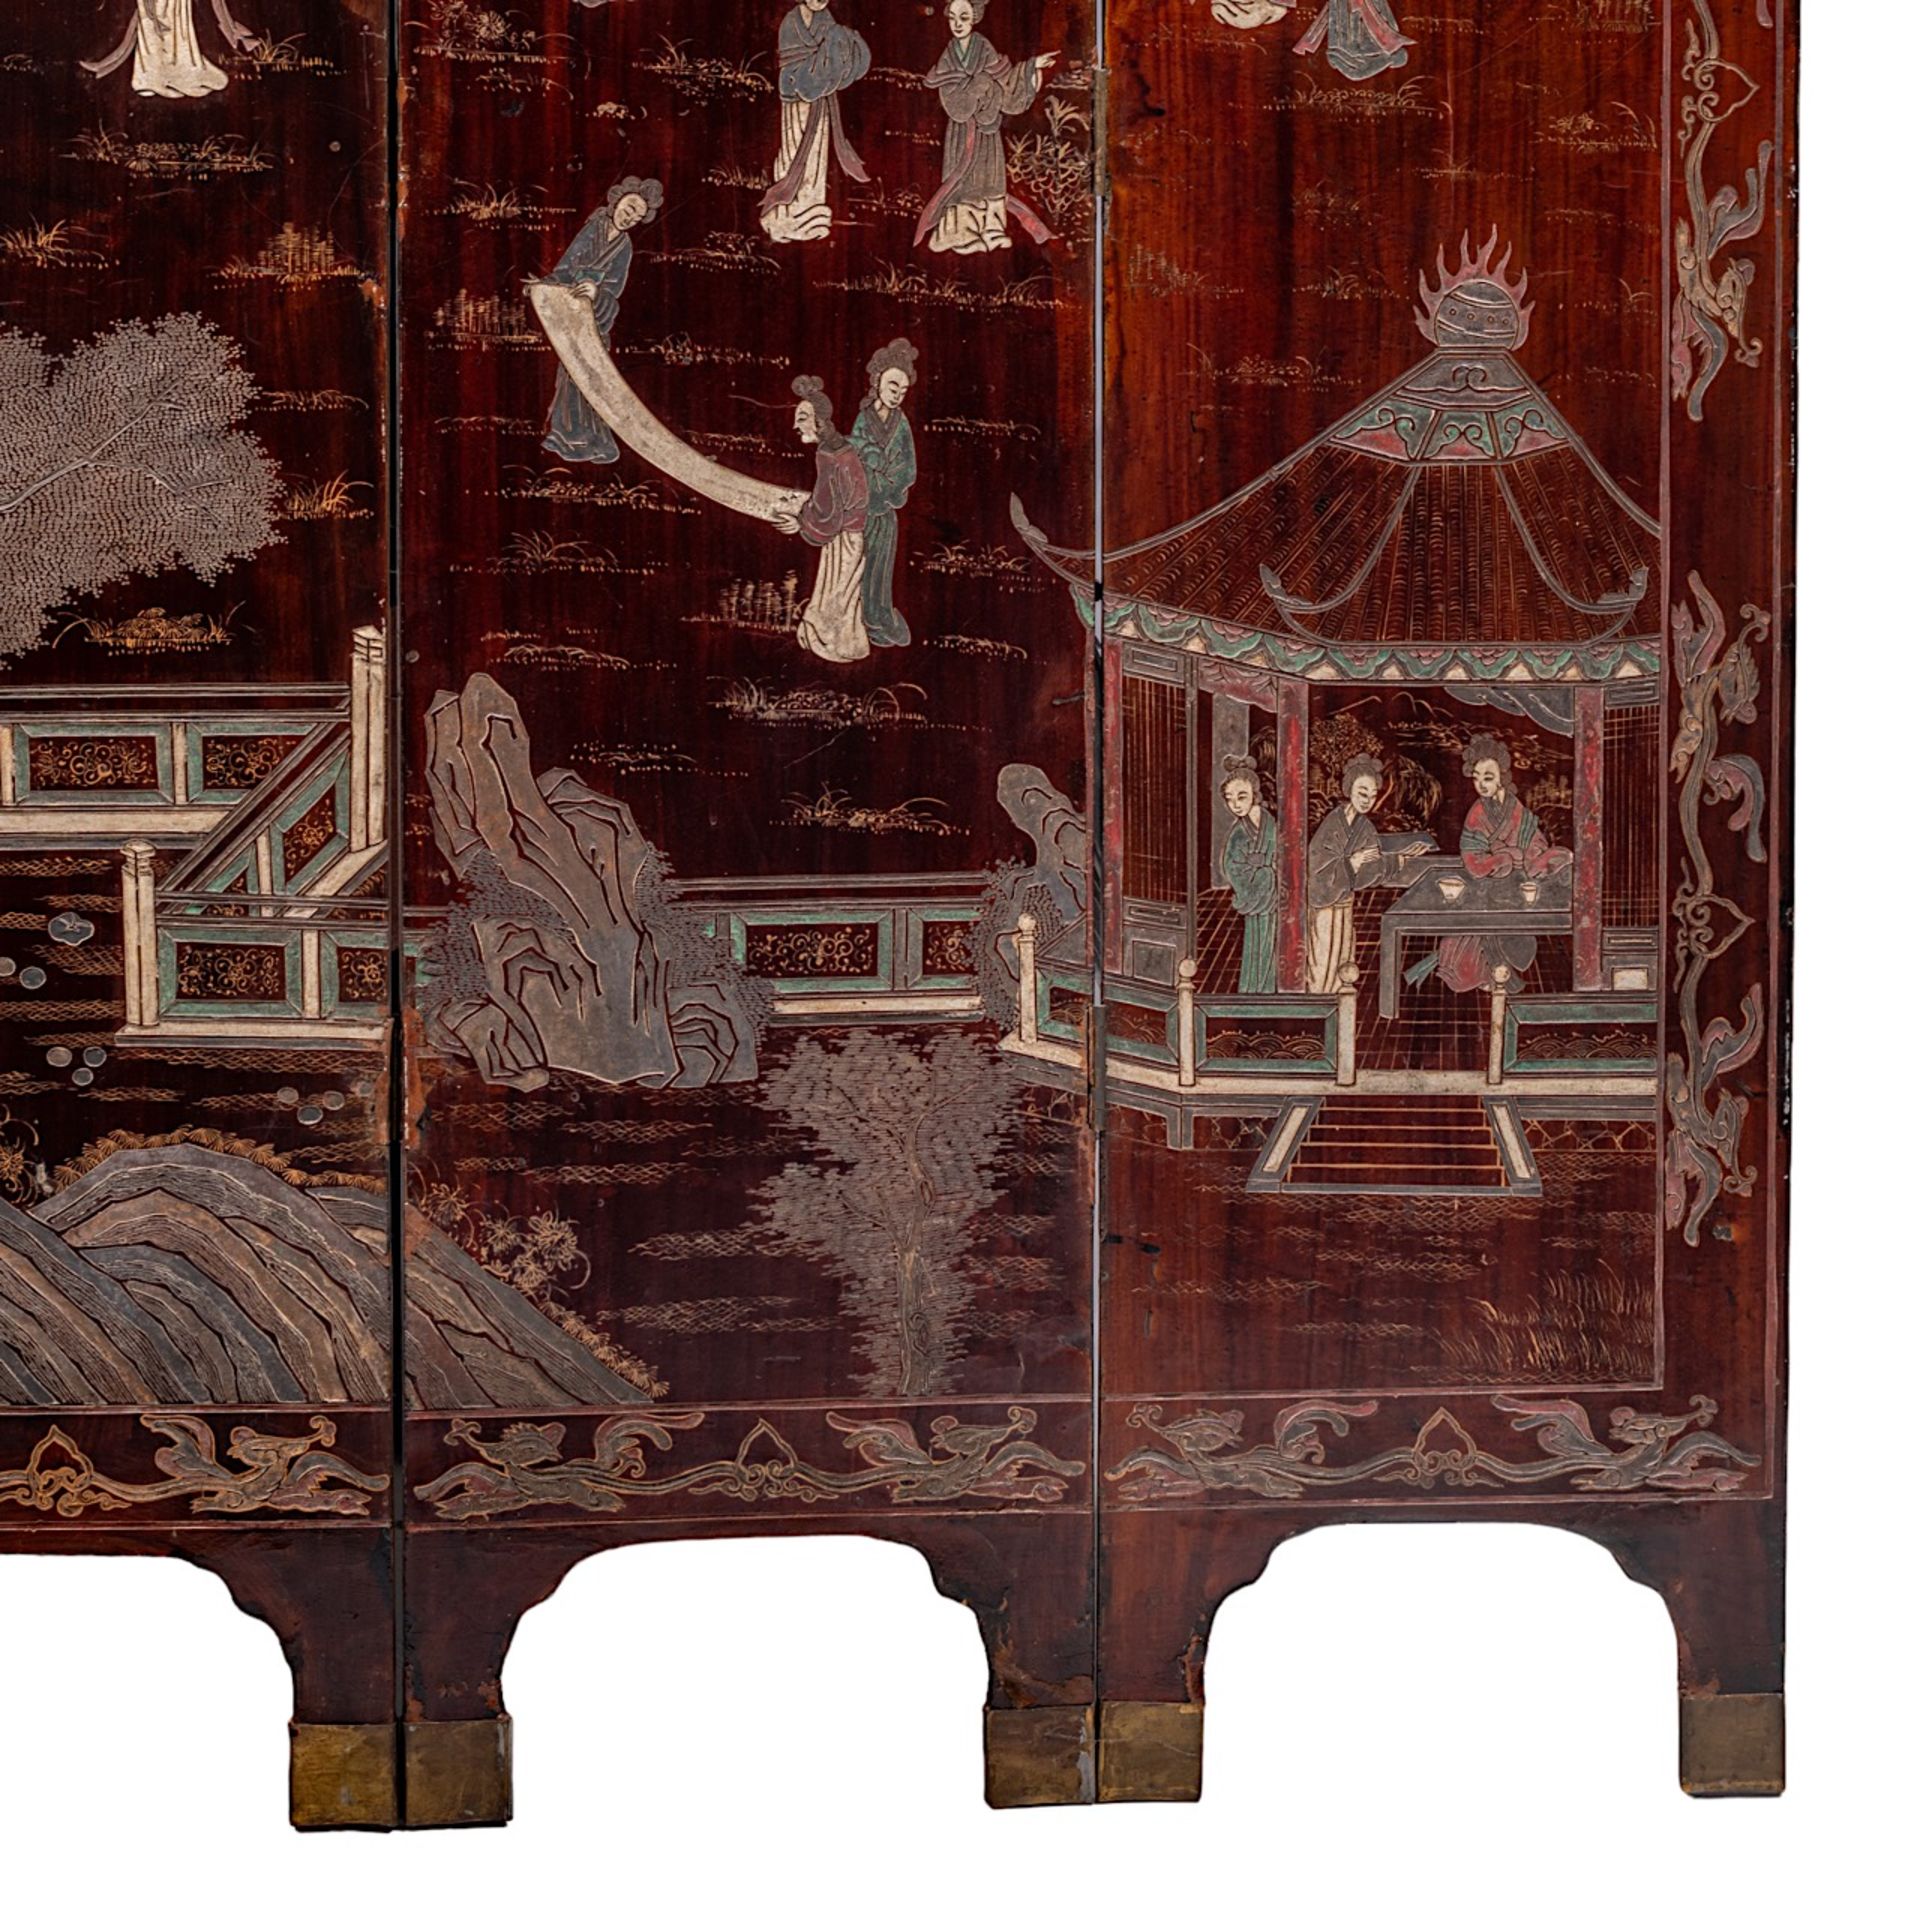 A Chinese coromandel lacquered four-panel chamber screen, late 18thC/19thC, H 162 - W 35,5 (each pan - Image 8 of 10